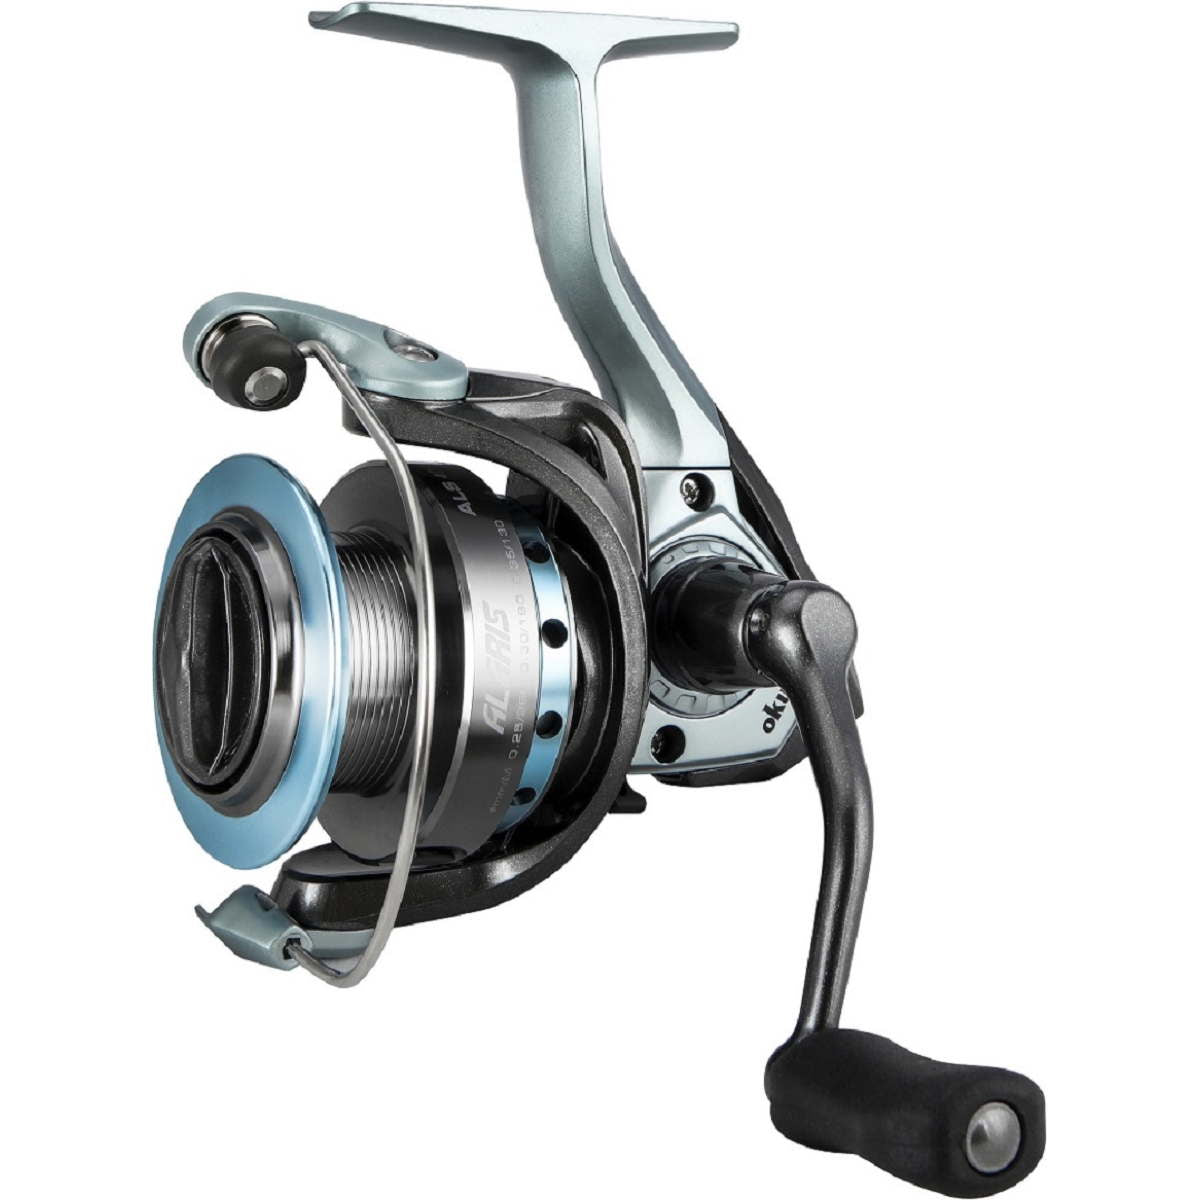 Photo of Okuma Alaris Spinning Reel for sale at United Tackle Shops.